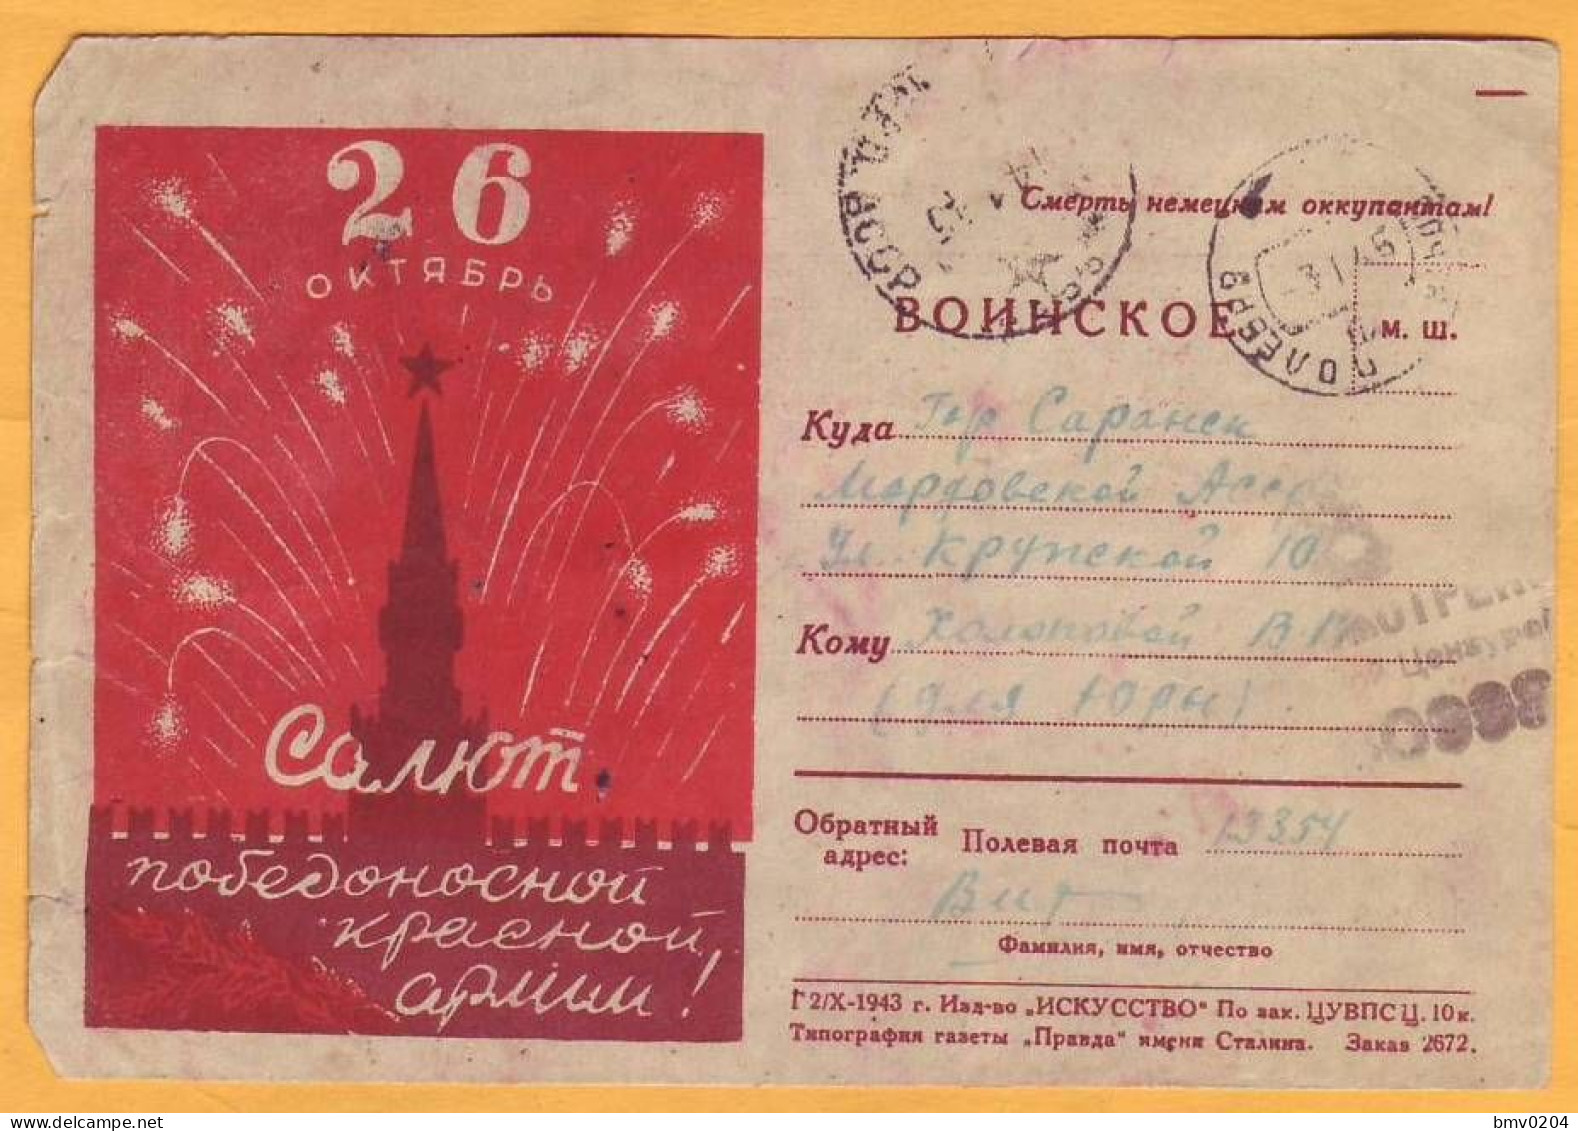 1945  USSR   Soviet fieldpost 13354  Second World War Reviewed by Military Censorship 0998